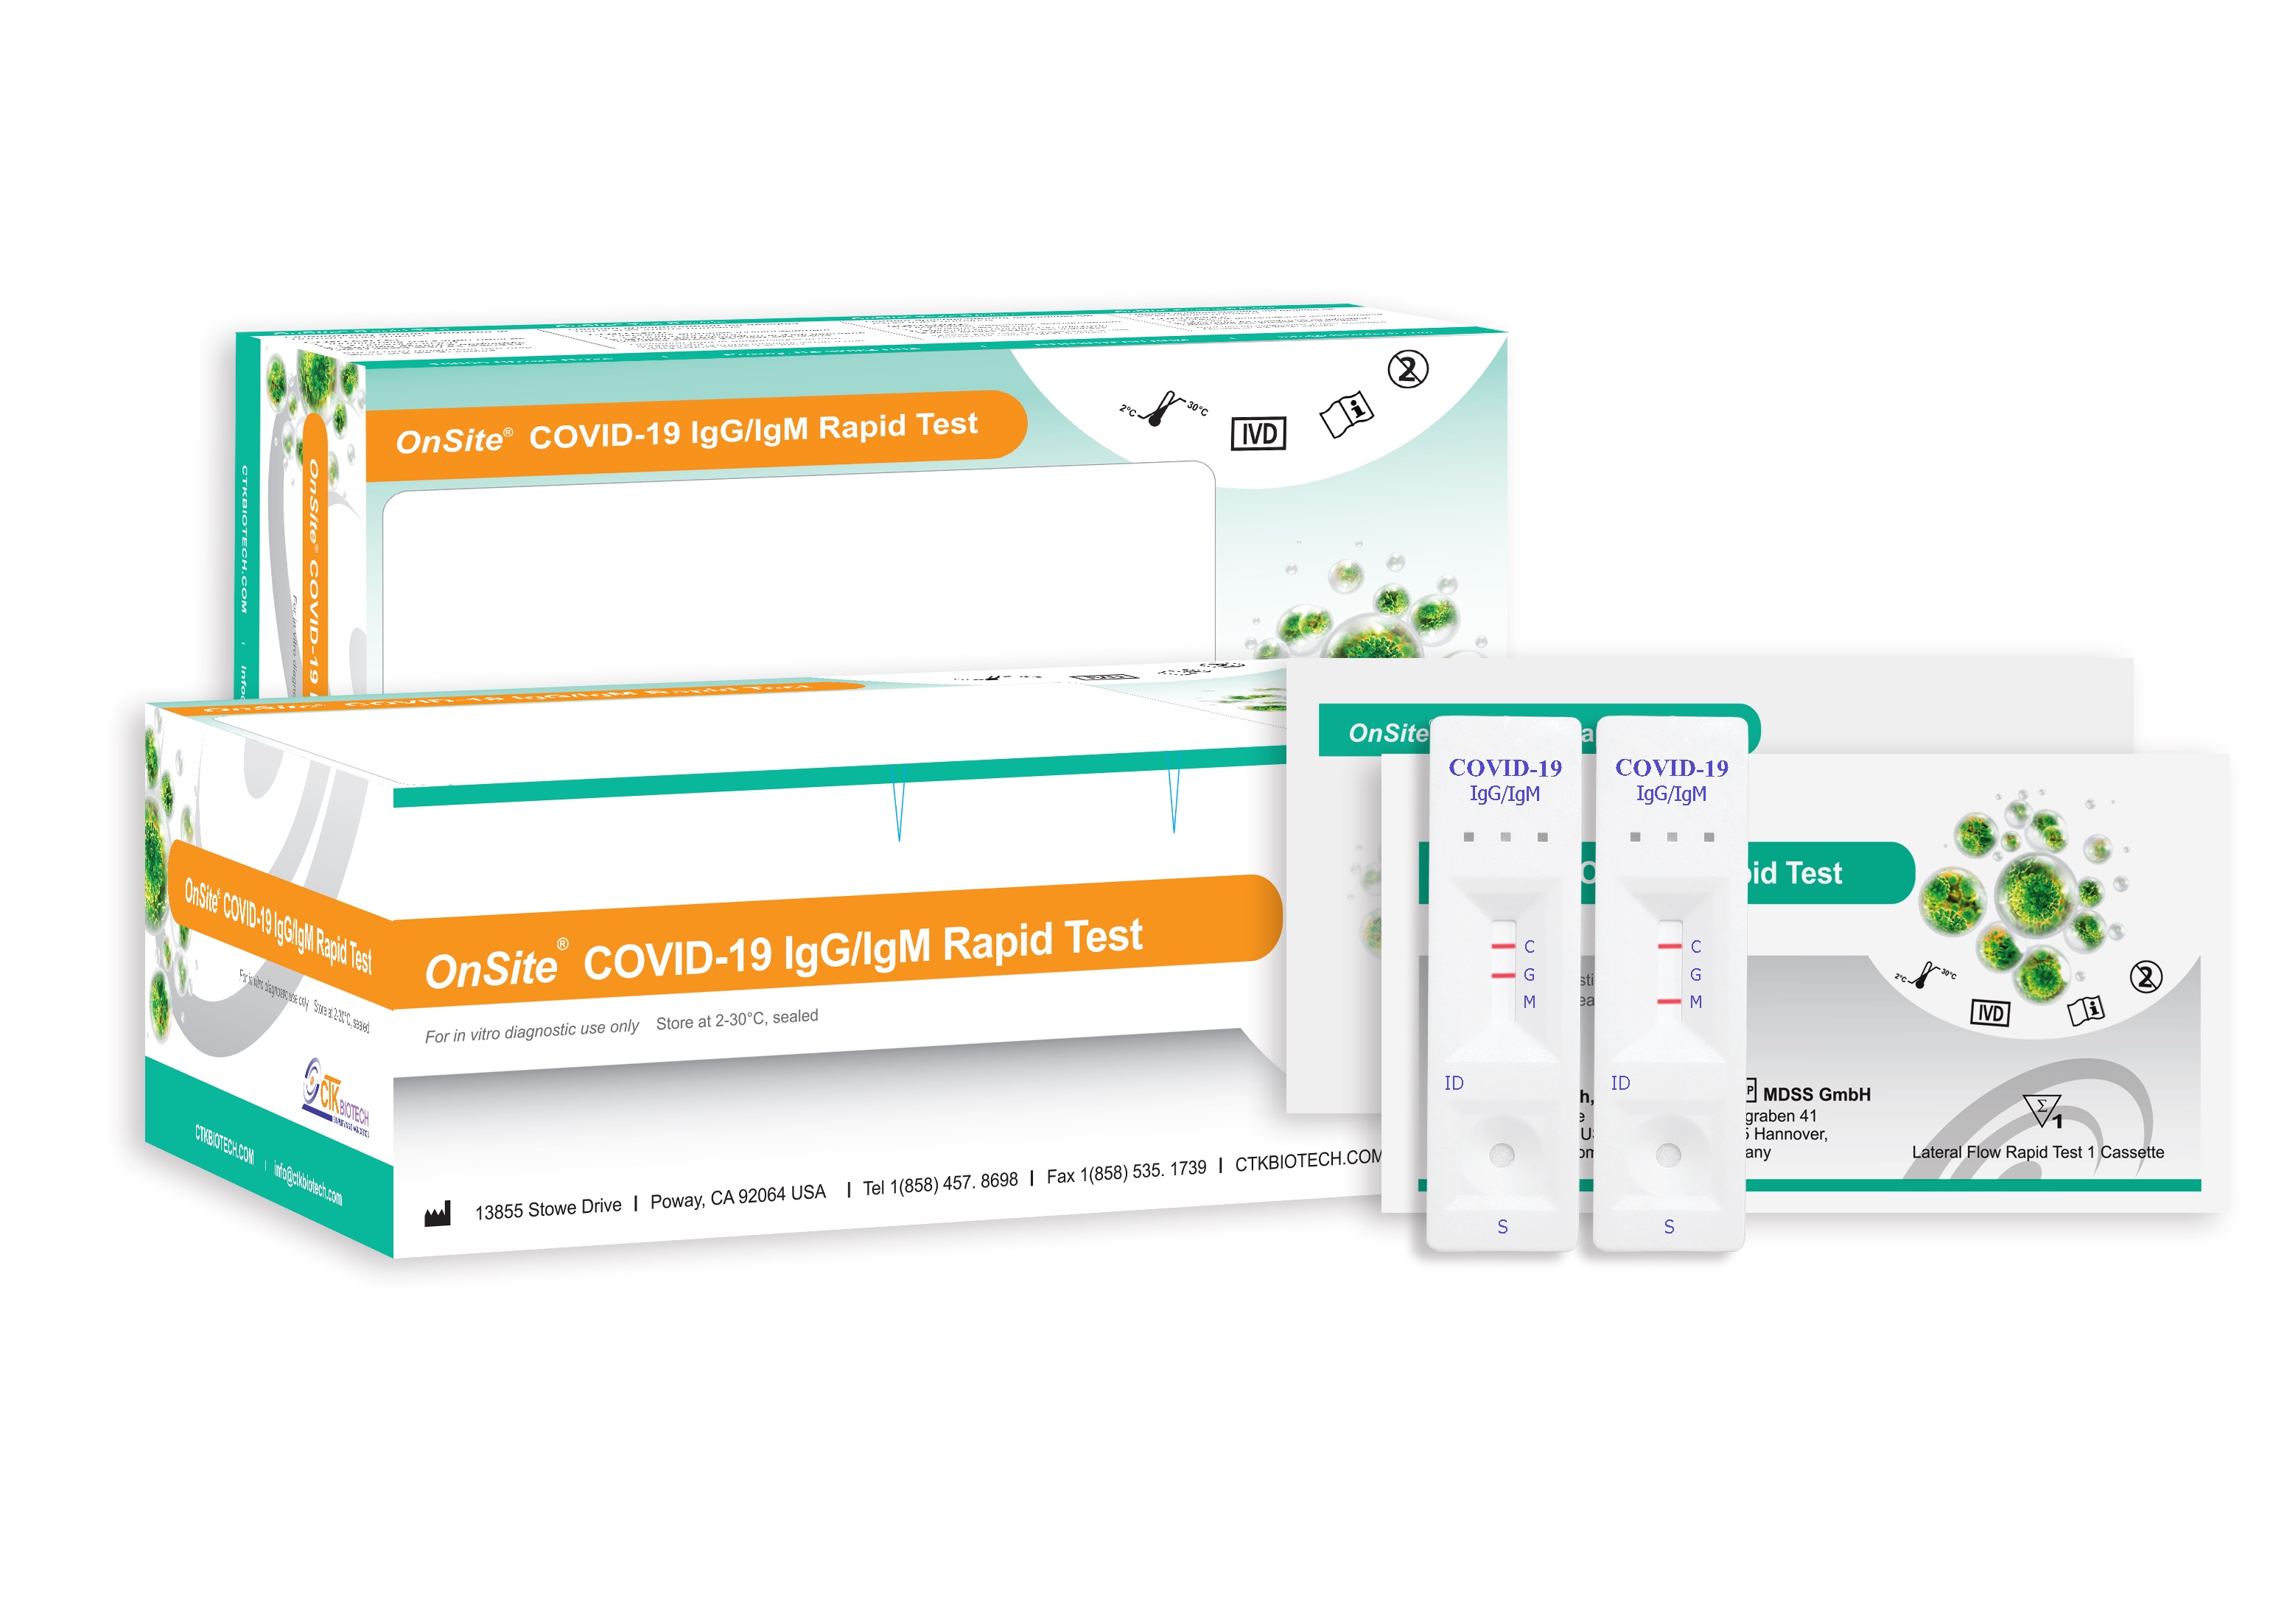 Covid 19, Rapid test kit, Instructions for use